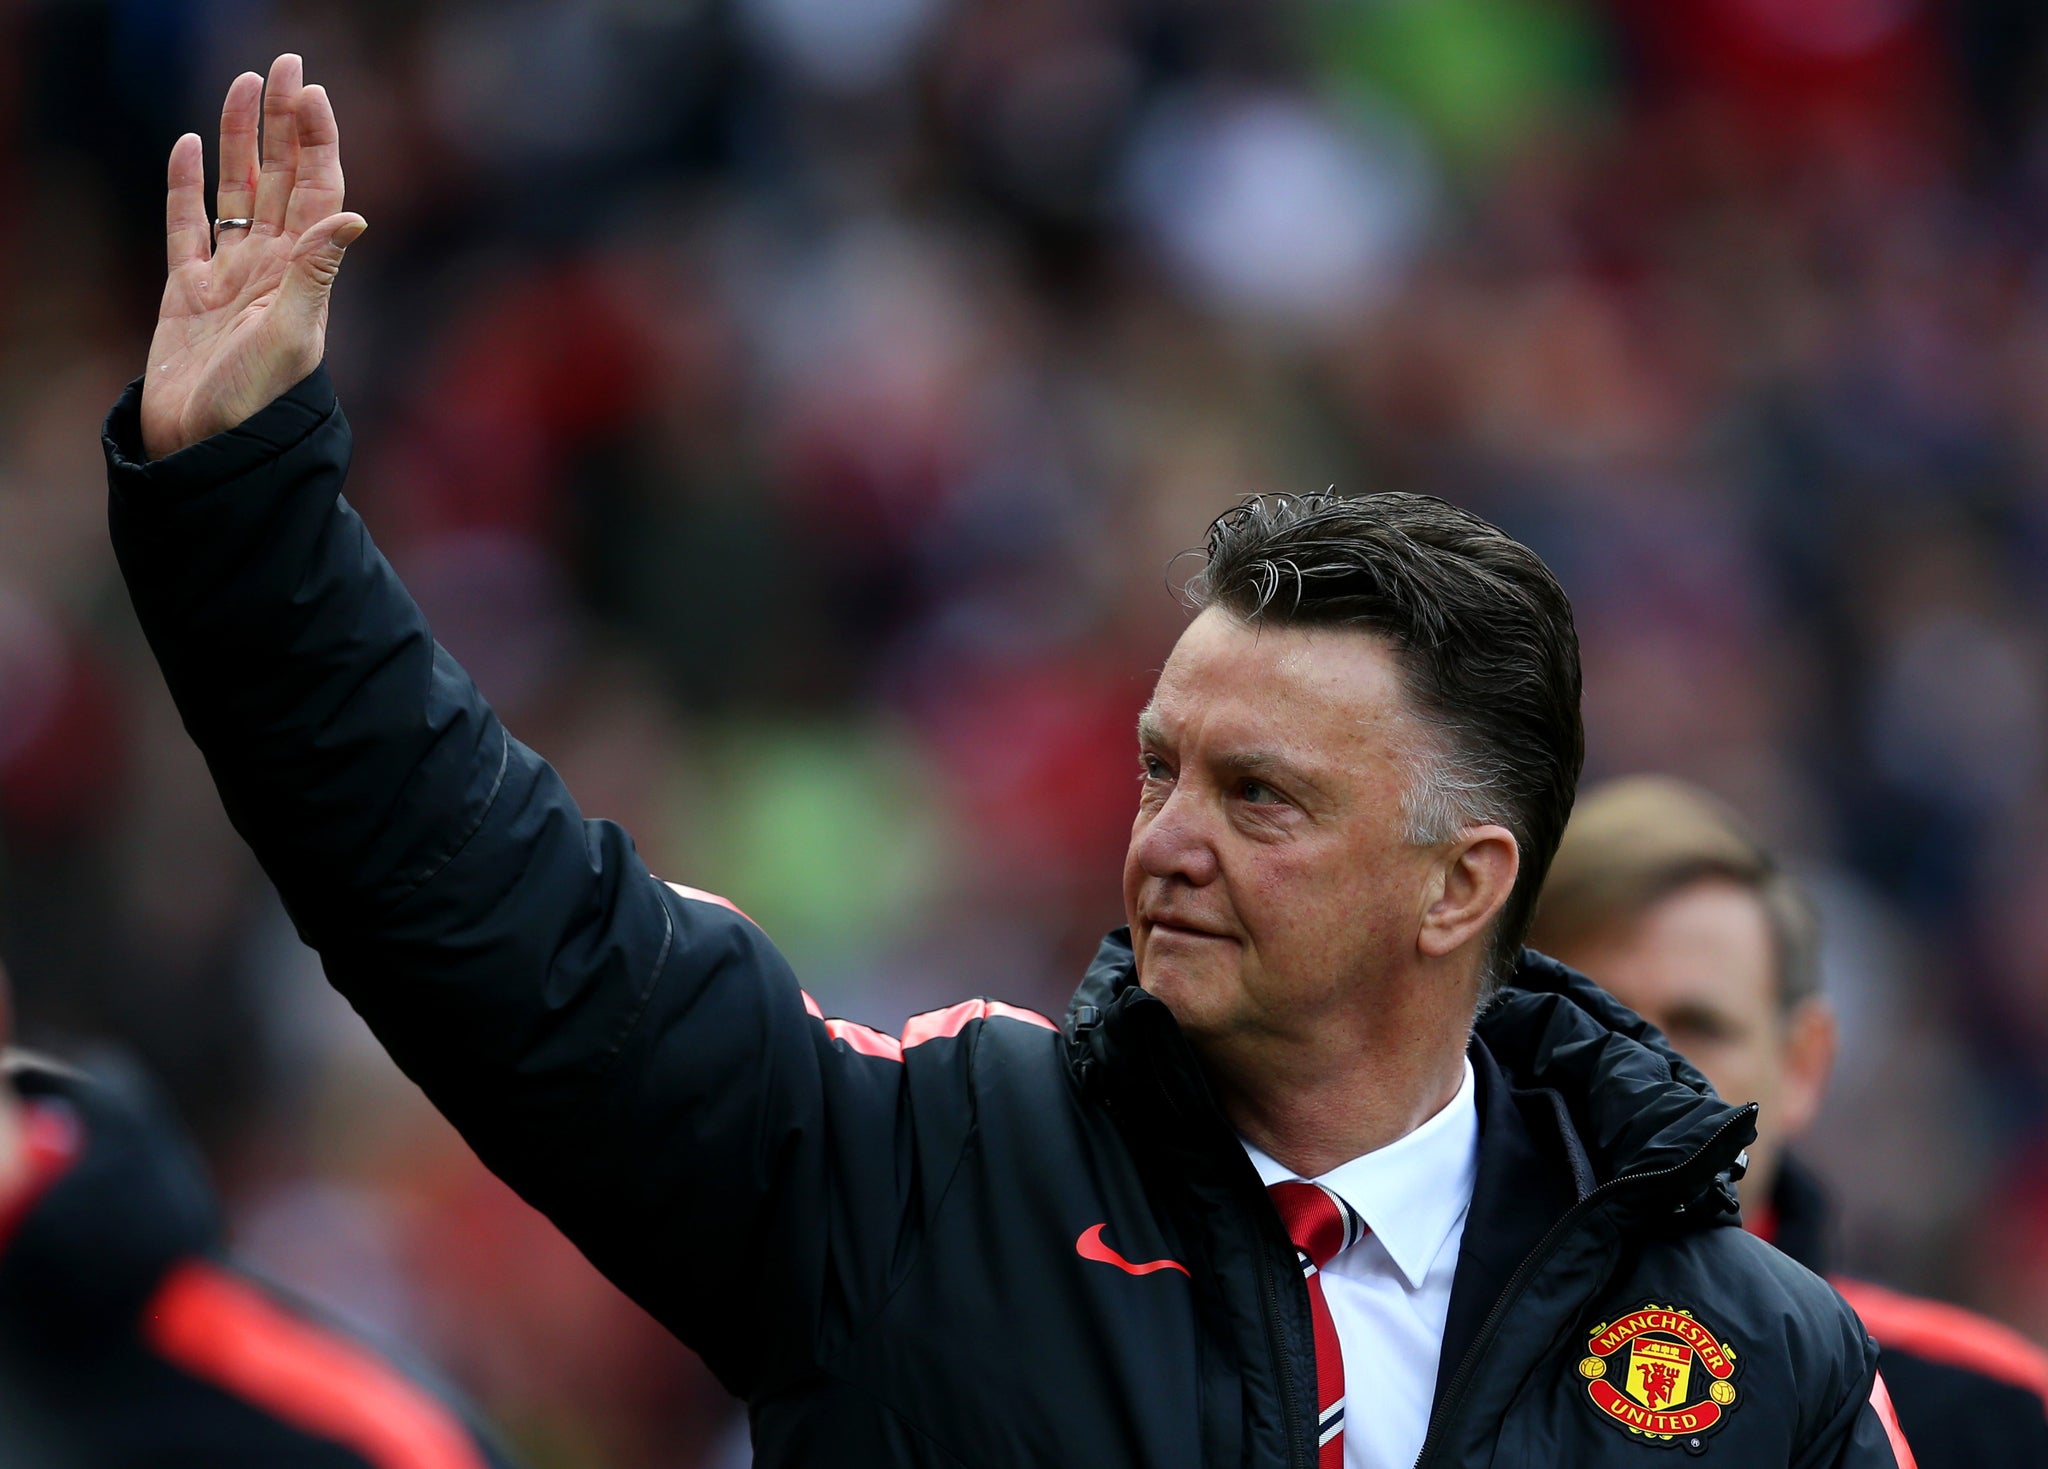 Manchester United manager Louis van Gaal looks on from the sideline